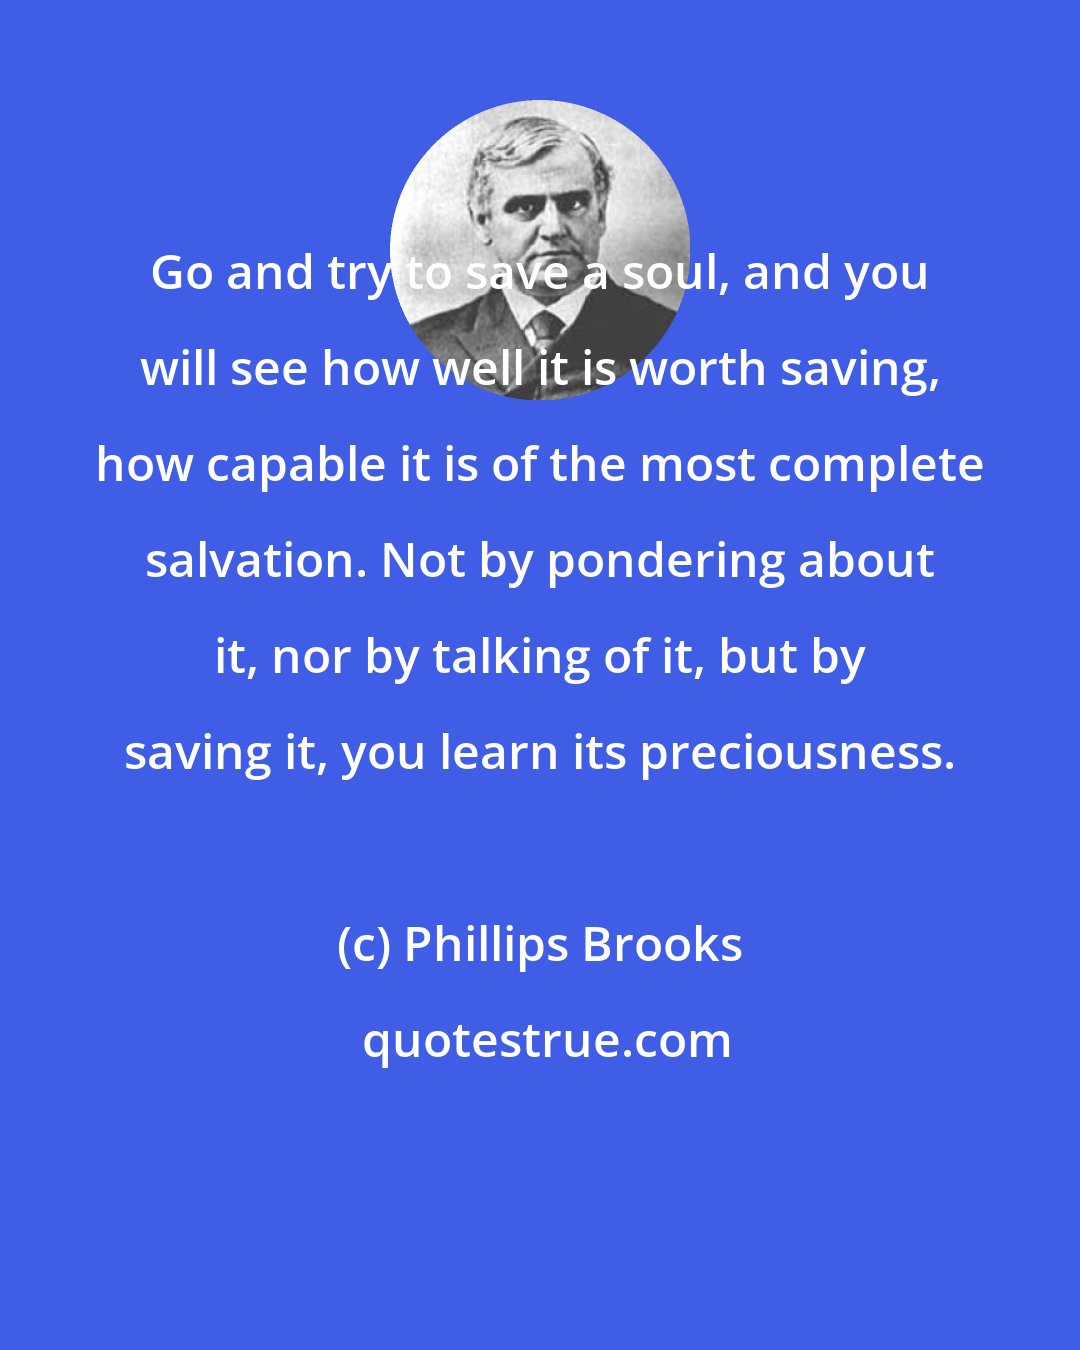 Phillips Brooks: Go and try to save a soul, and you will see how well it is worth saving, how capable it is of the most complete salvation. Not by pondering about it, nor by talking of it, but by saving it, you learn its preciousness.